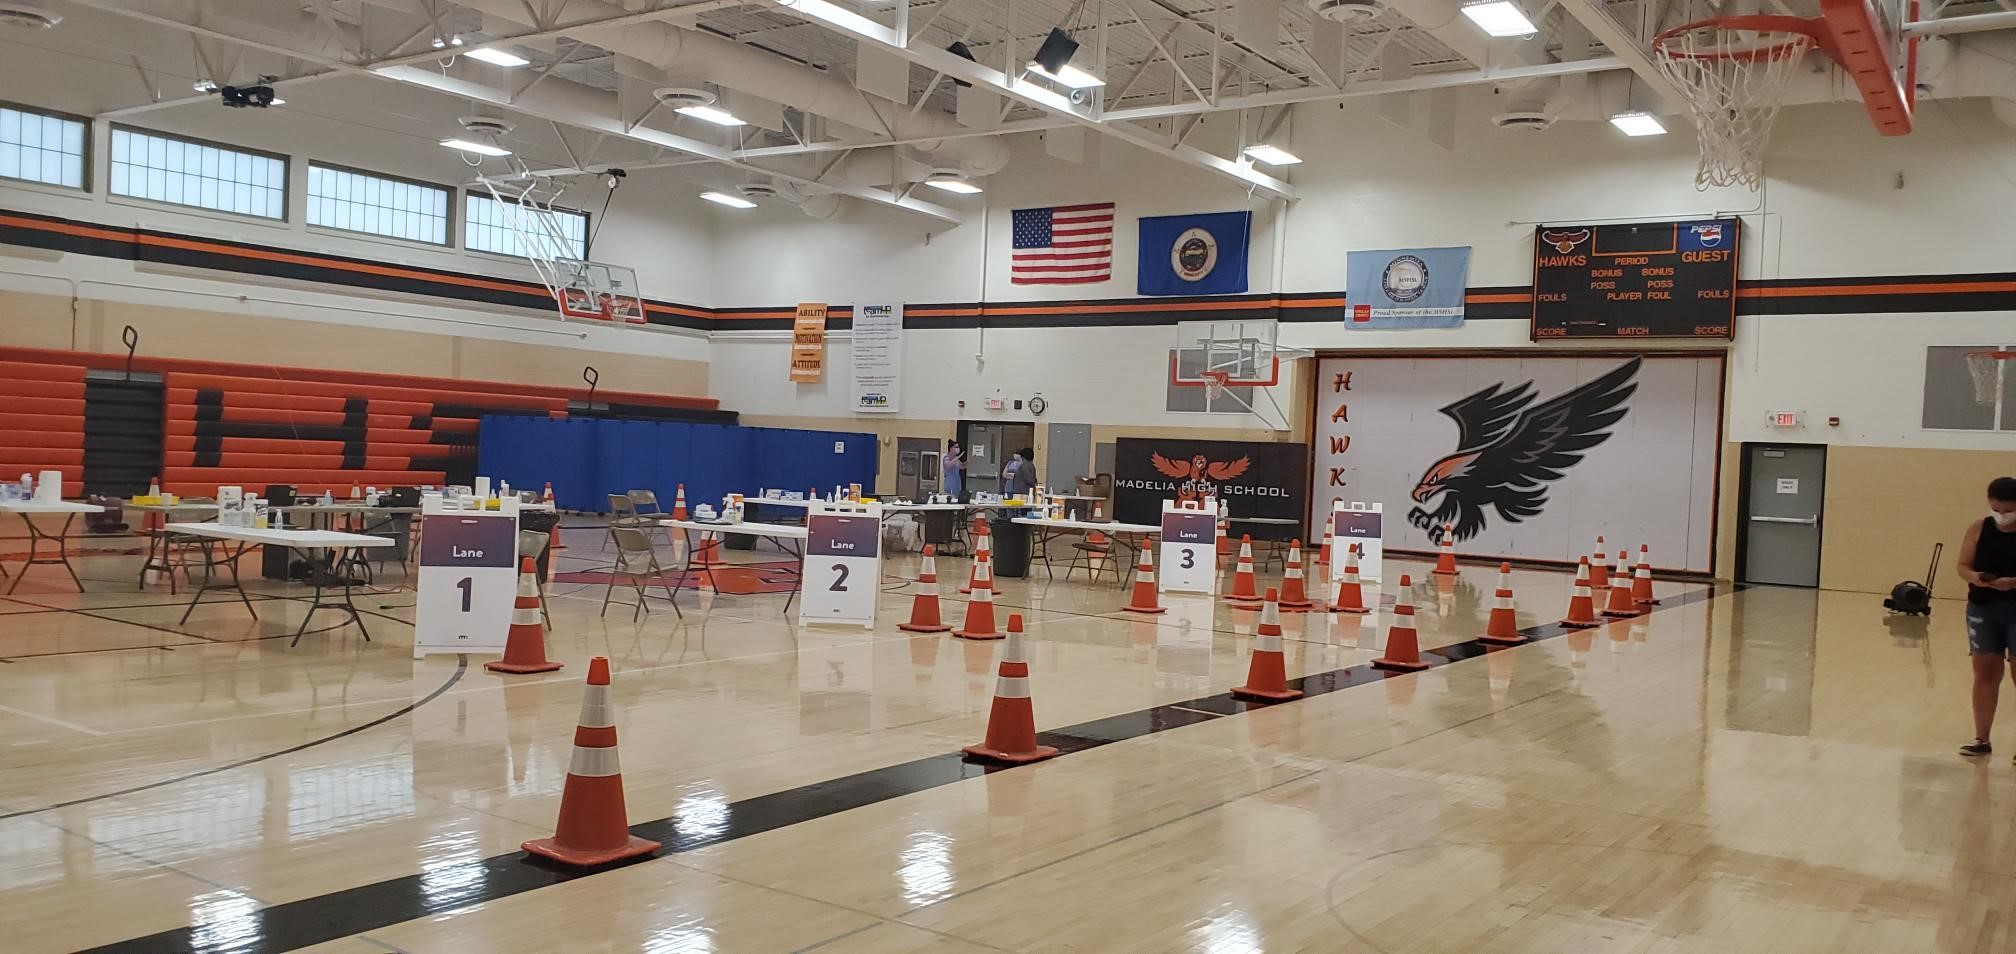 COVID-19 testing site in gym